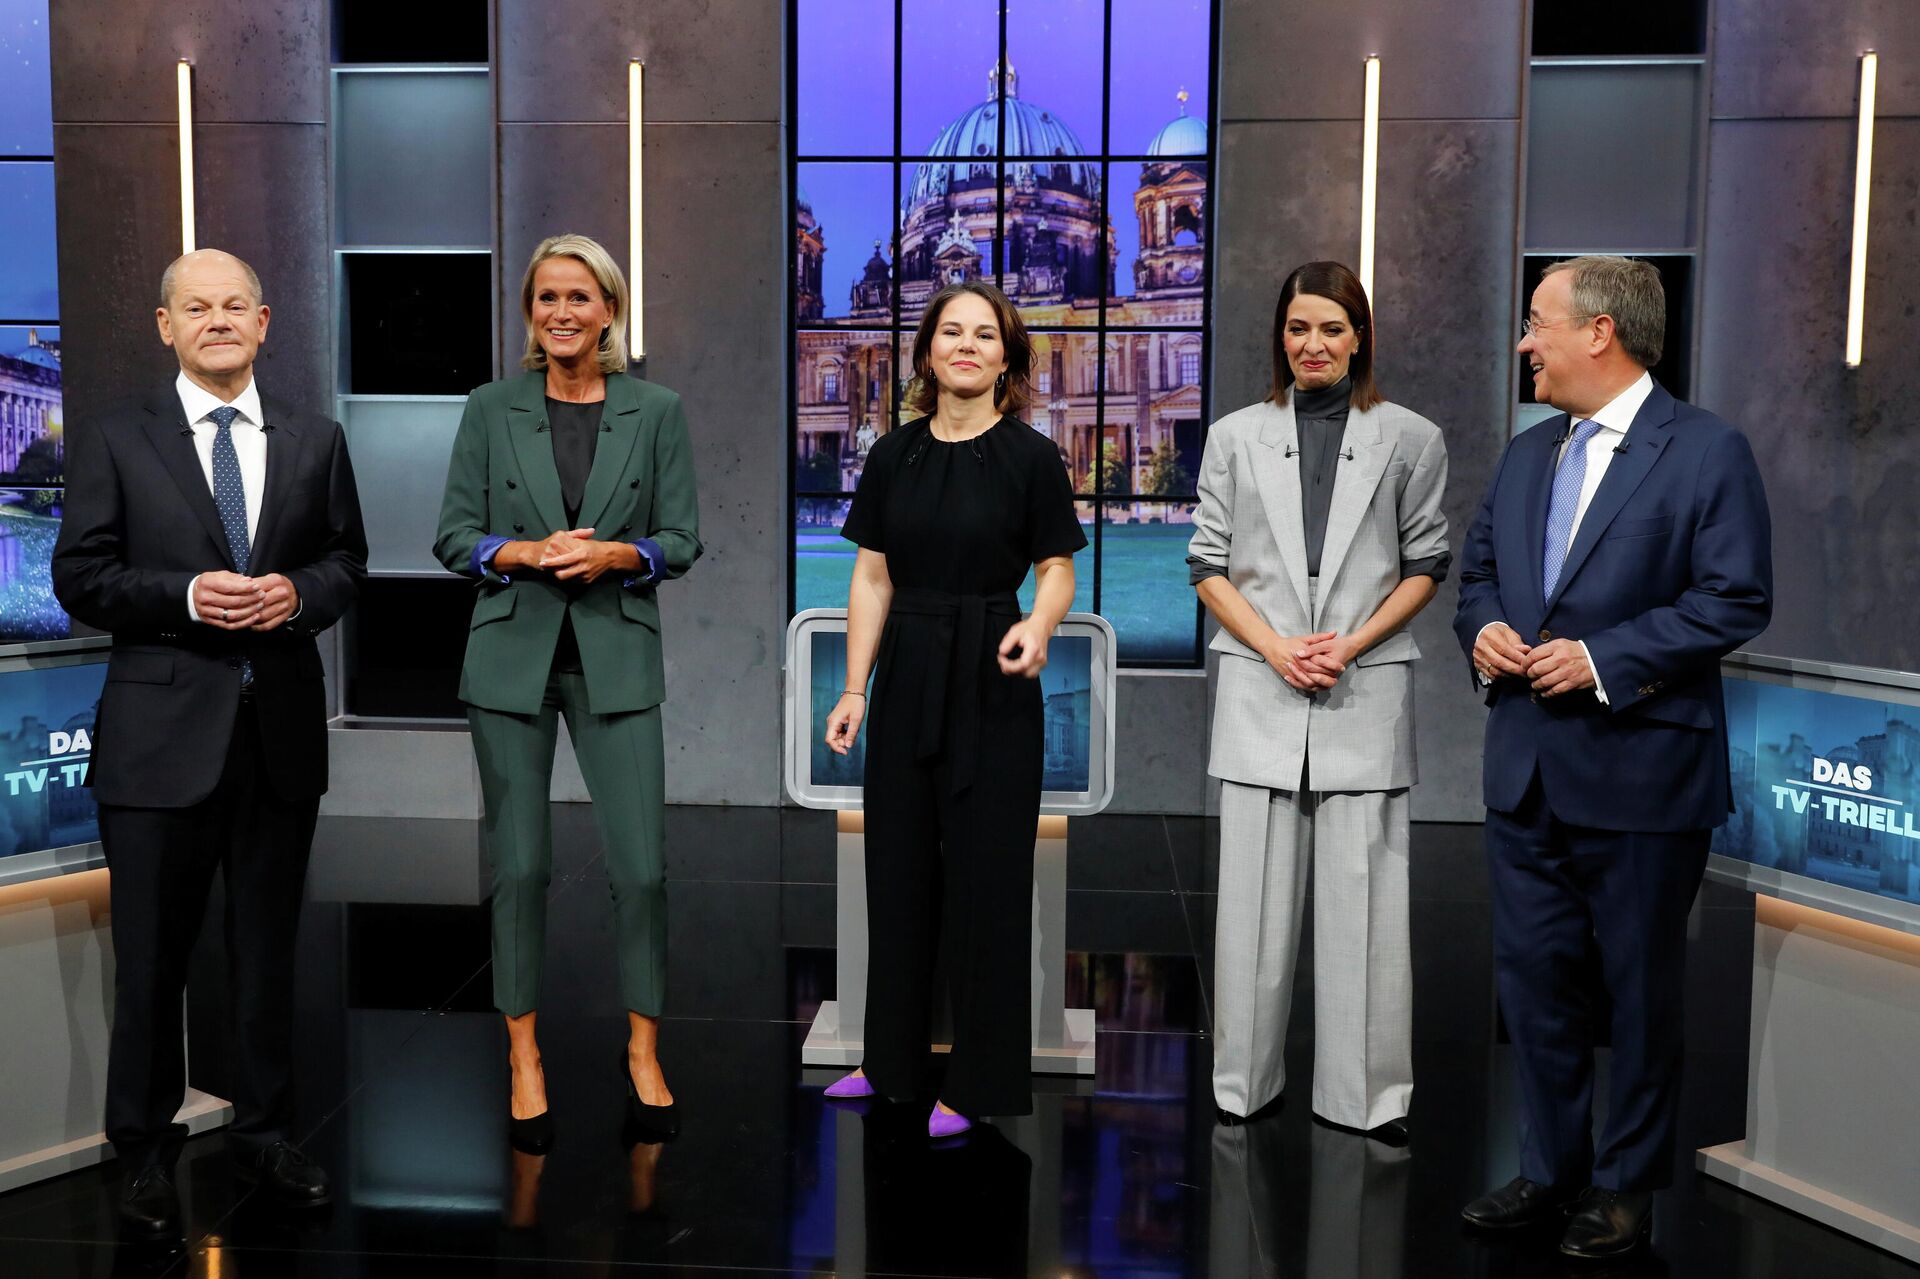 Candidates for the Federal elections Armin Laschet, CDU, Olaf Scholz, SPD and Annalena Baerbock, Greens pose with Linda Zervakis and Claudia von Brauchitsch for a photo, ahead of a TV talk show, in Berlin, Germany, September 19, 2021. REUTERS/Michele Tantussi - Sputnik International, 1920, 27.09.2021